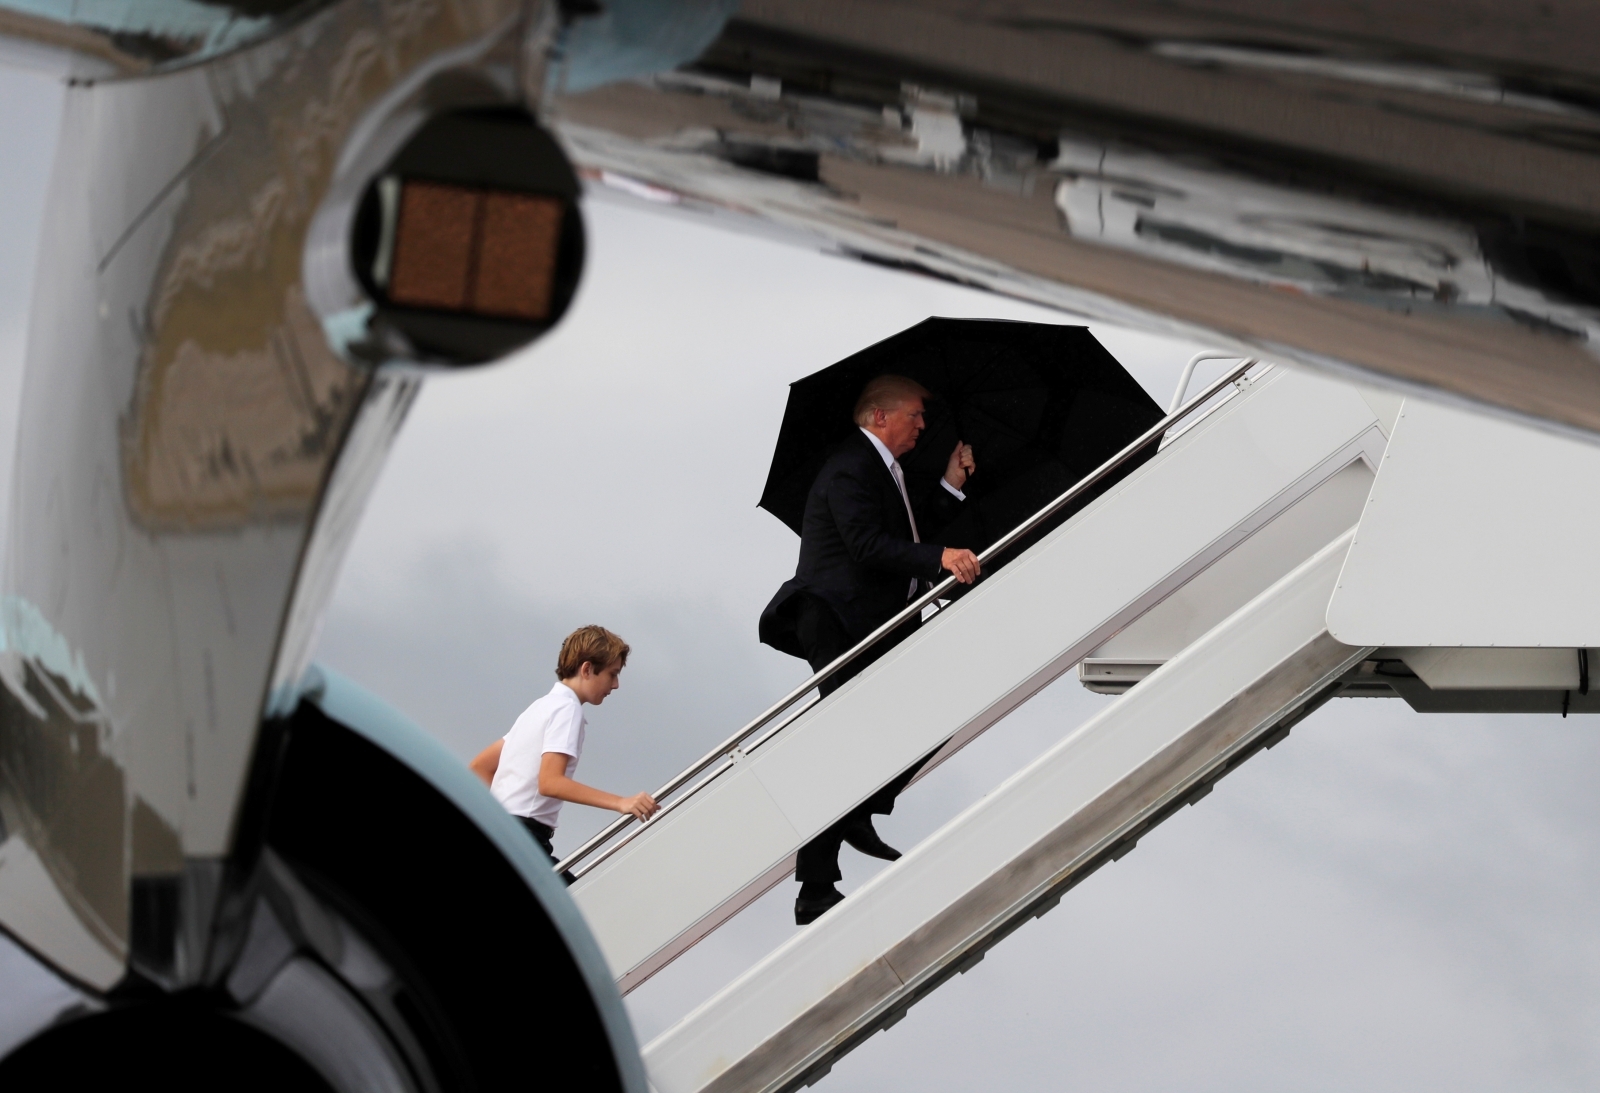 Get your own umbrella! Donald Trump leaves his rain-soaked family to fend for themselves